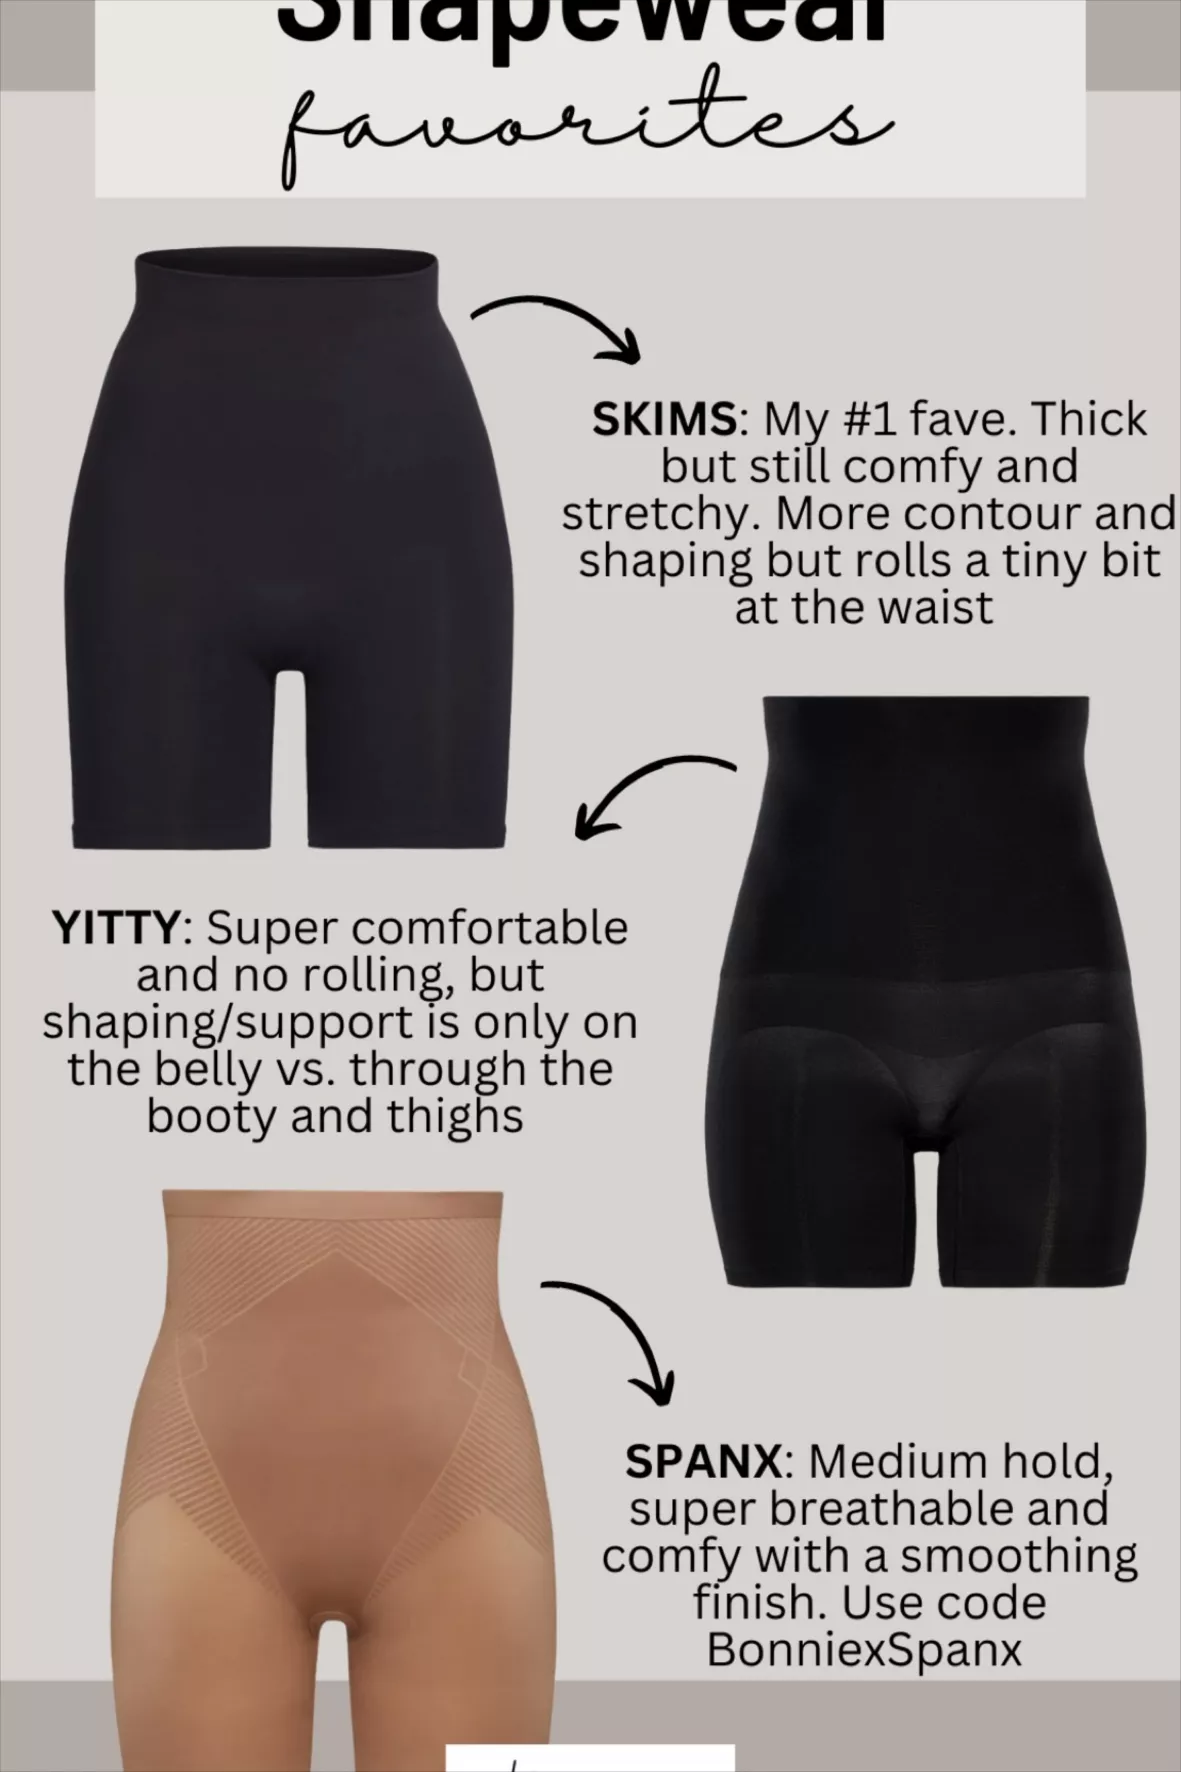 I'm a size 18 with an apron belly - nothing's wrong with my body but my  fave shapewear smooths me out & lifts my booty